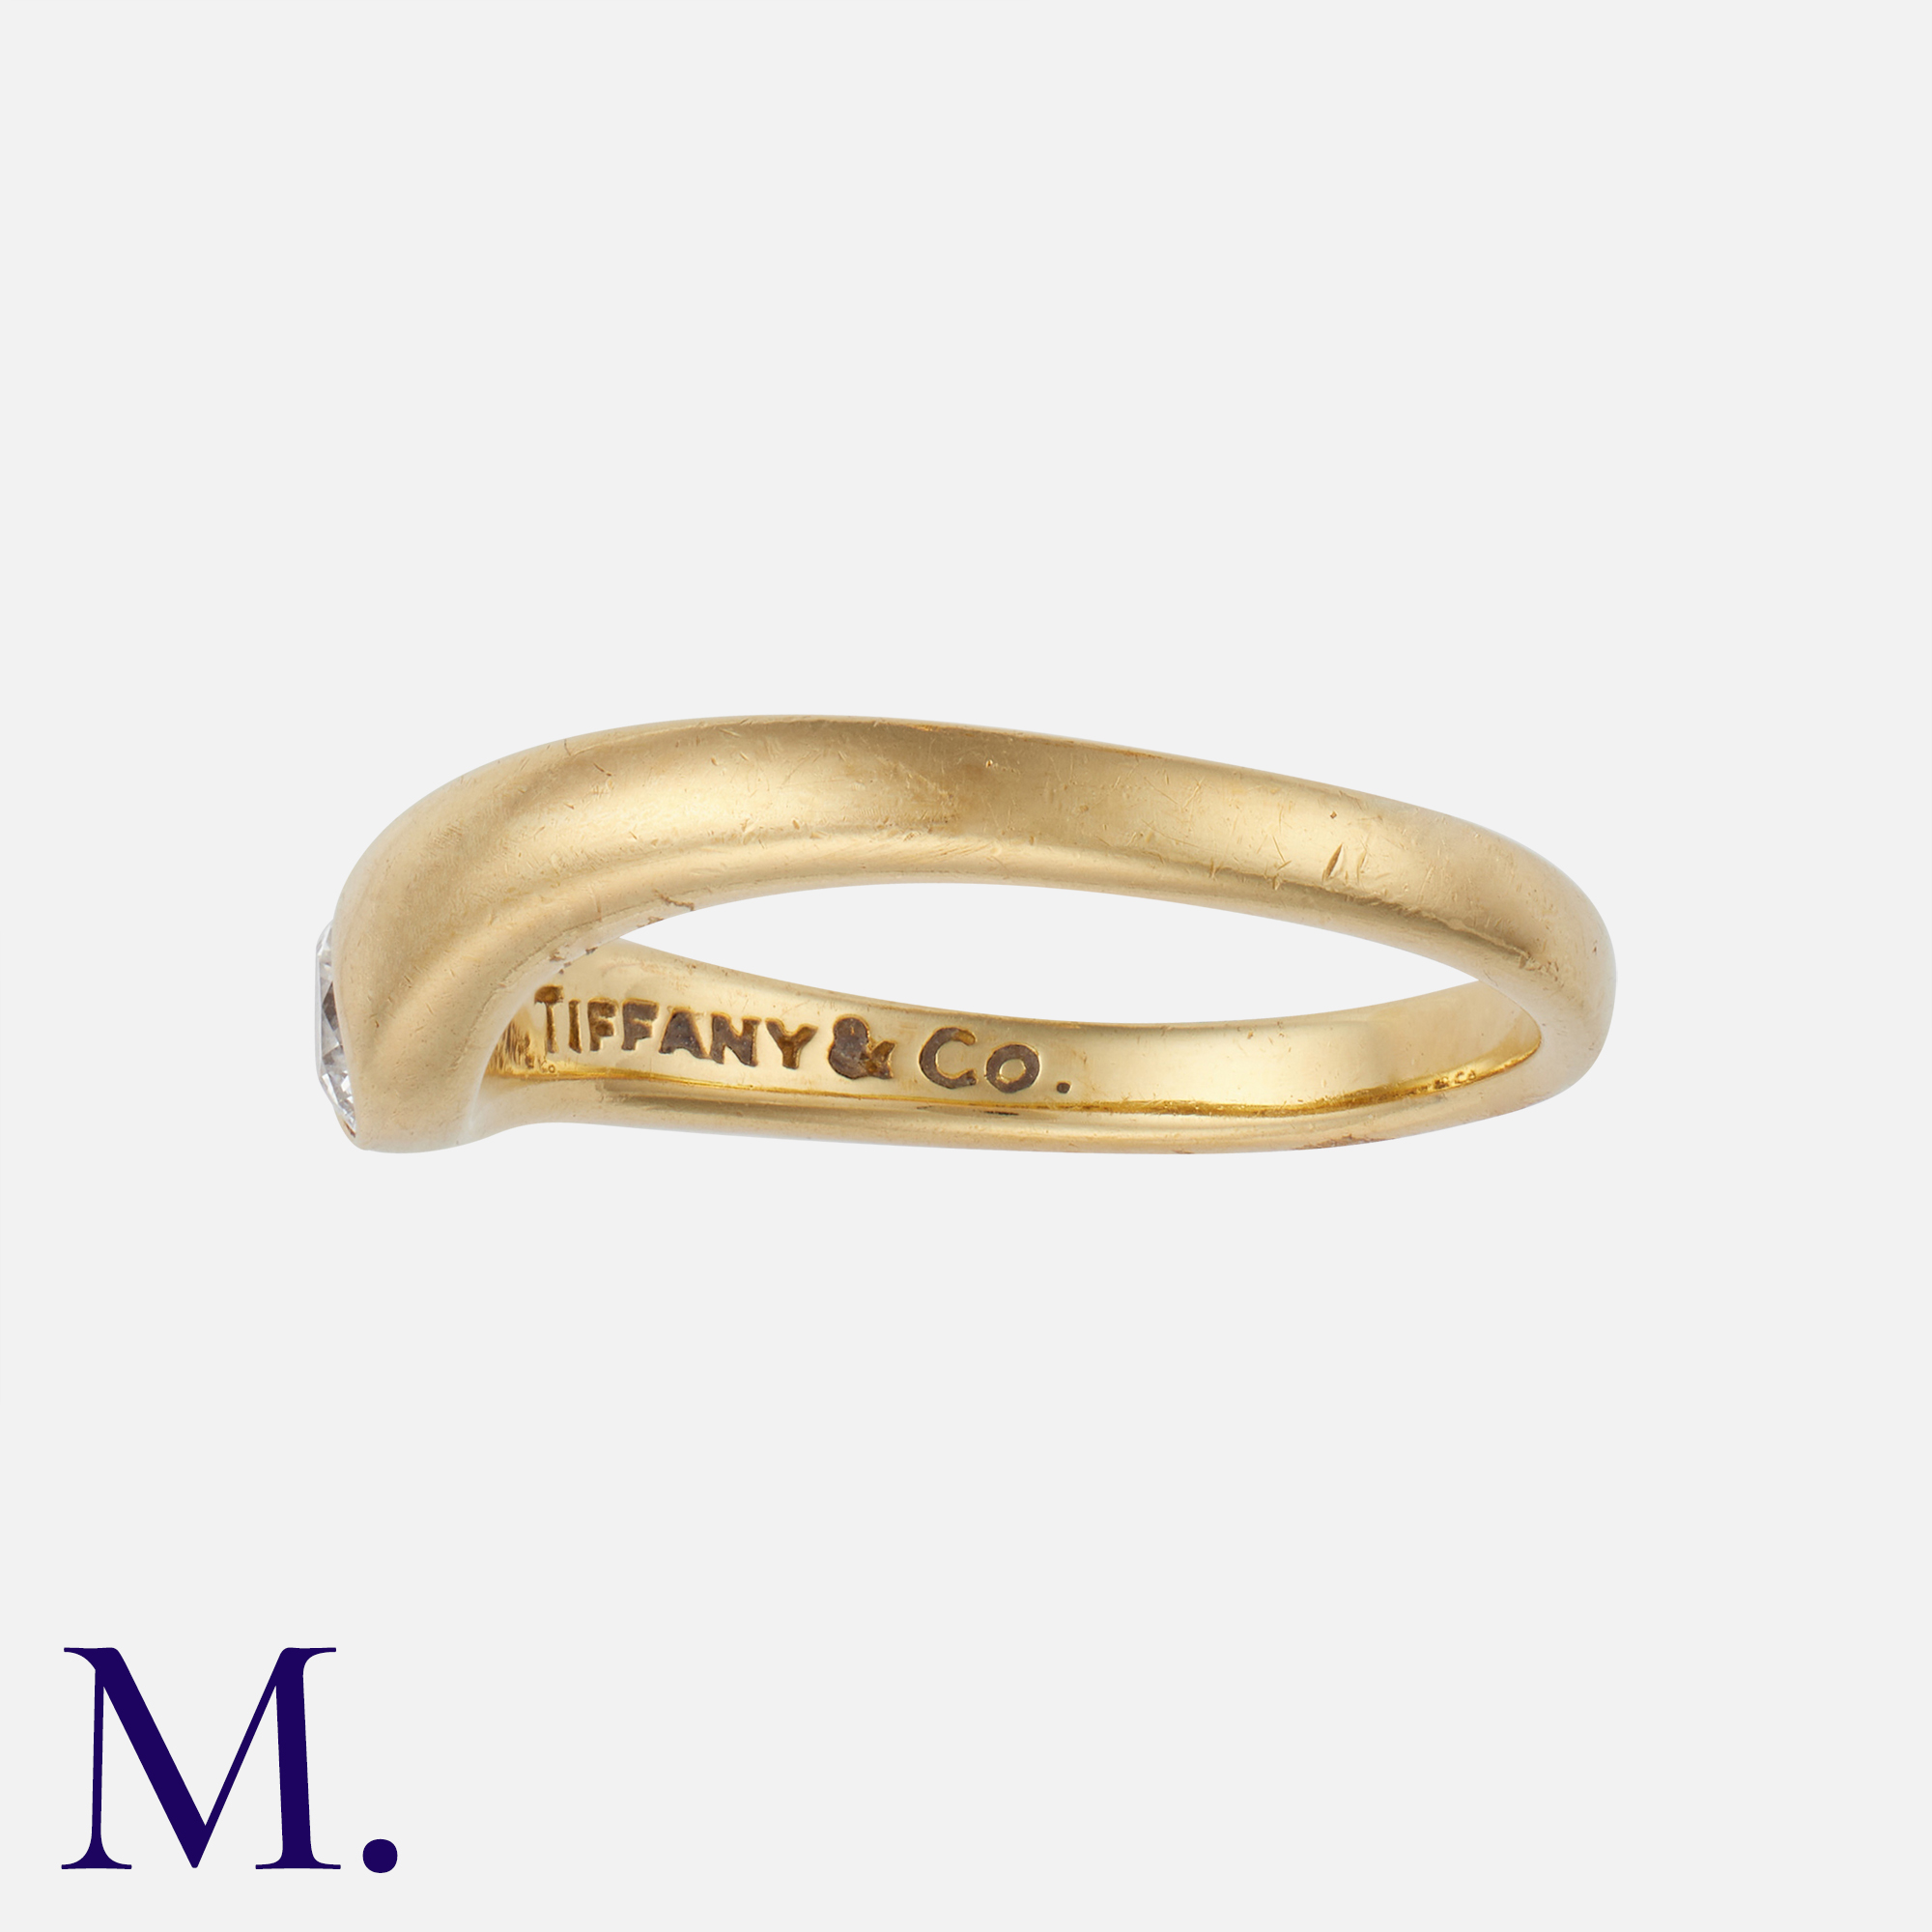 TIFFANY & CO. A Diamond Ring in 18K yellow gold, flush set with a brilliant cut diamond weighing - Image 2 of 2